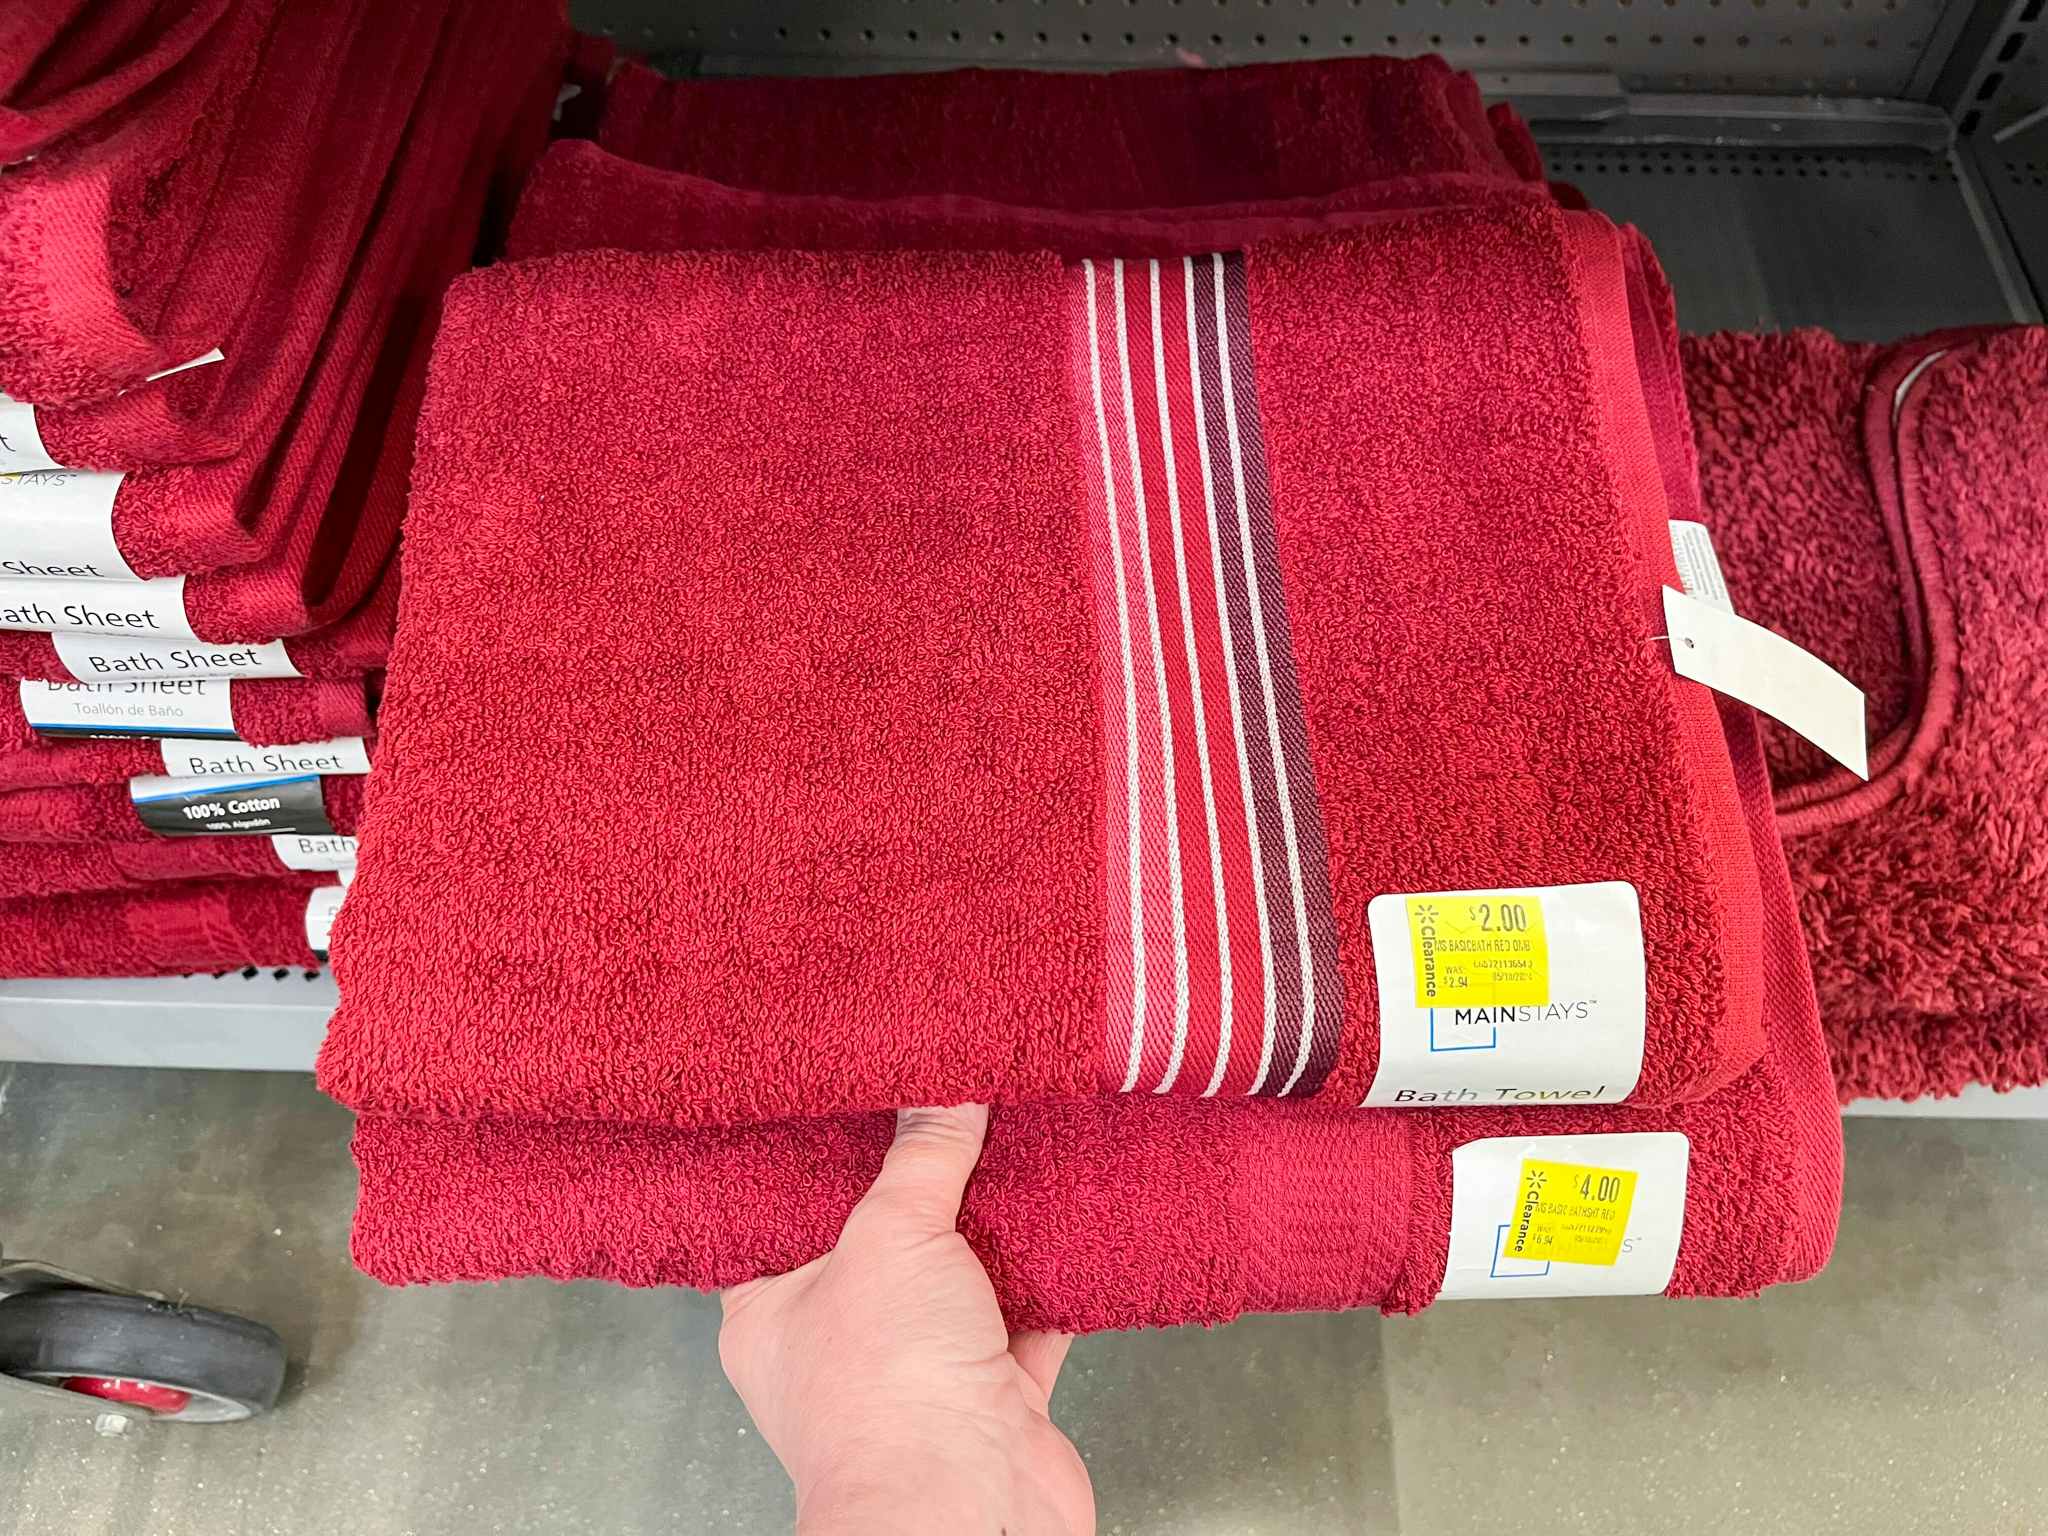 Mainstays Bathroom Linen Clearance: $2 Towels, $4 Rugs, and More